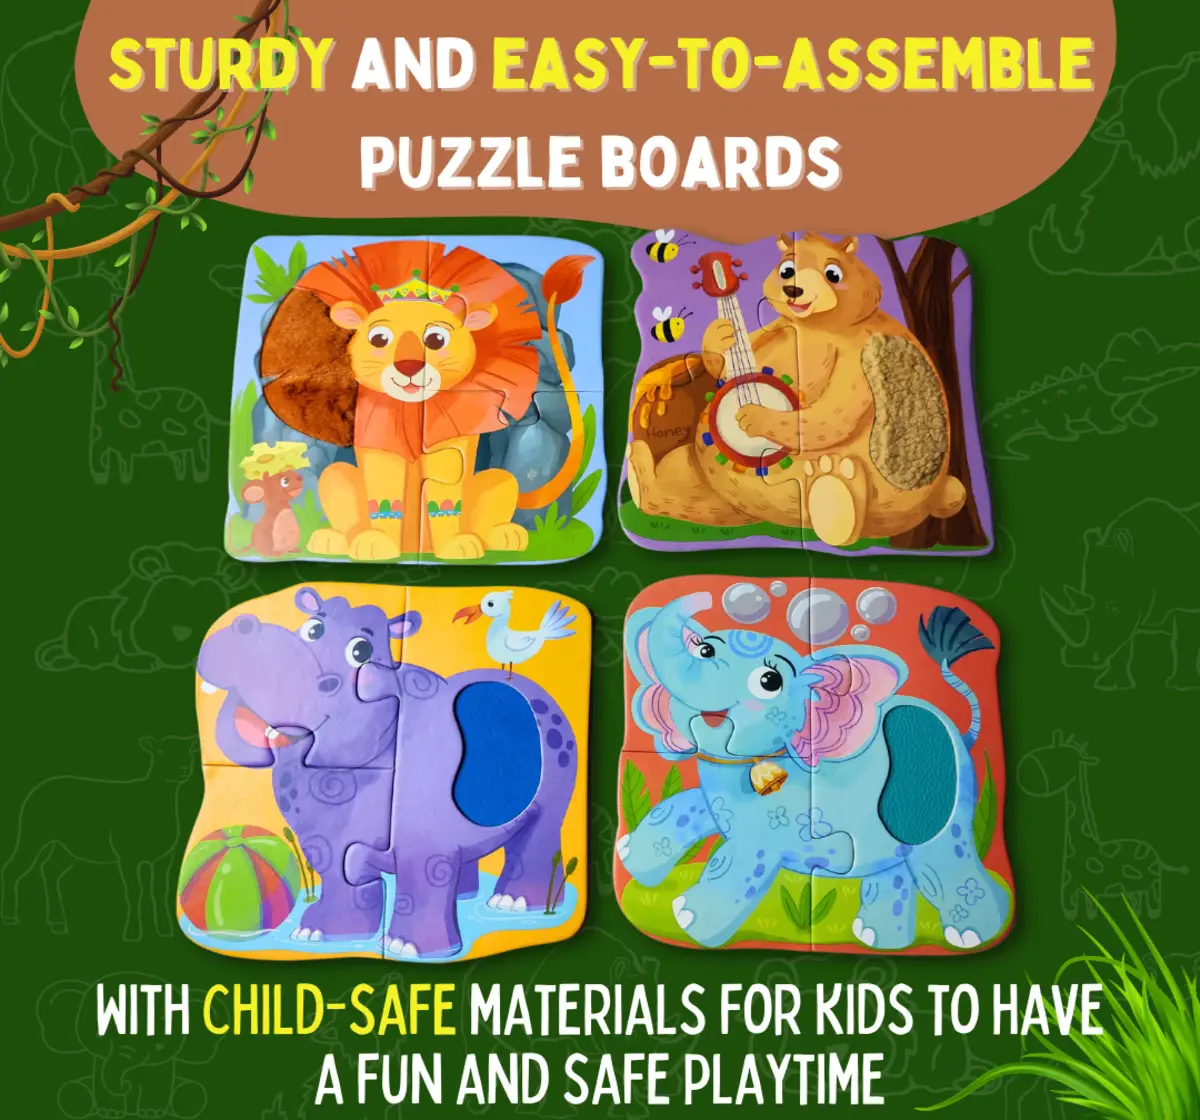 PepPlay My First Touch & Feel Puzzles Wild Animals For Kids of Age 12M+, Multicolour